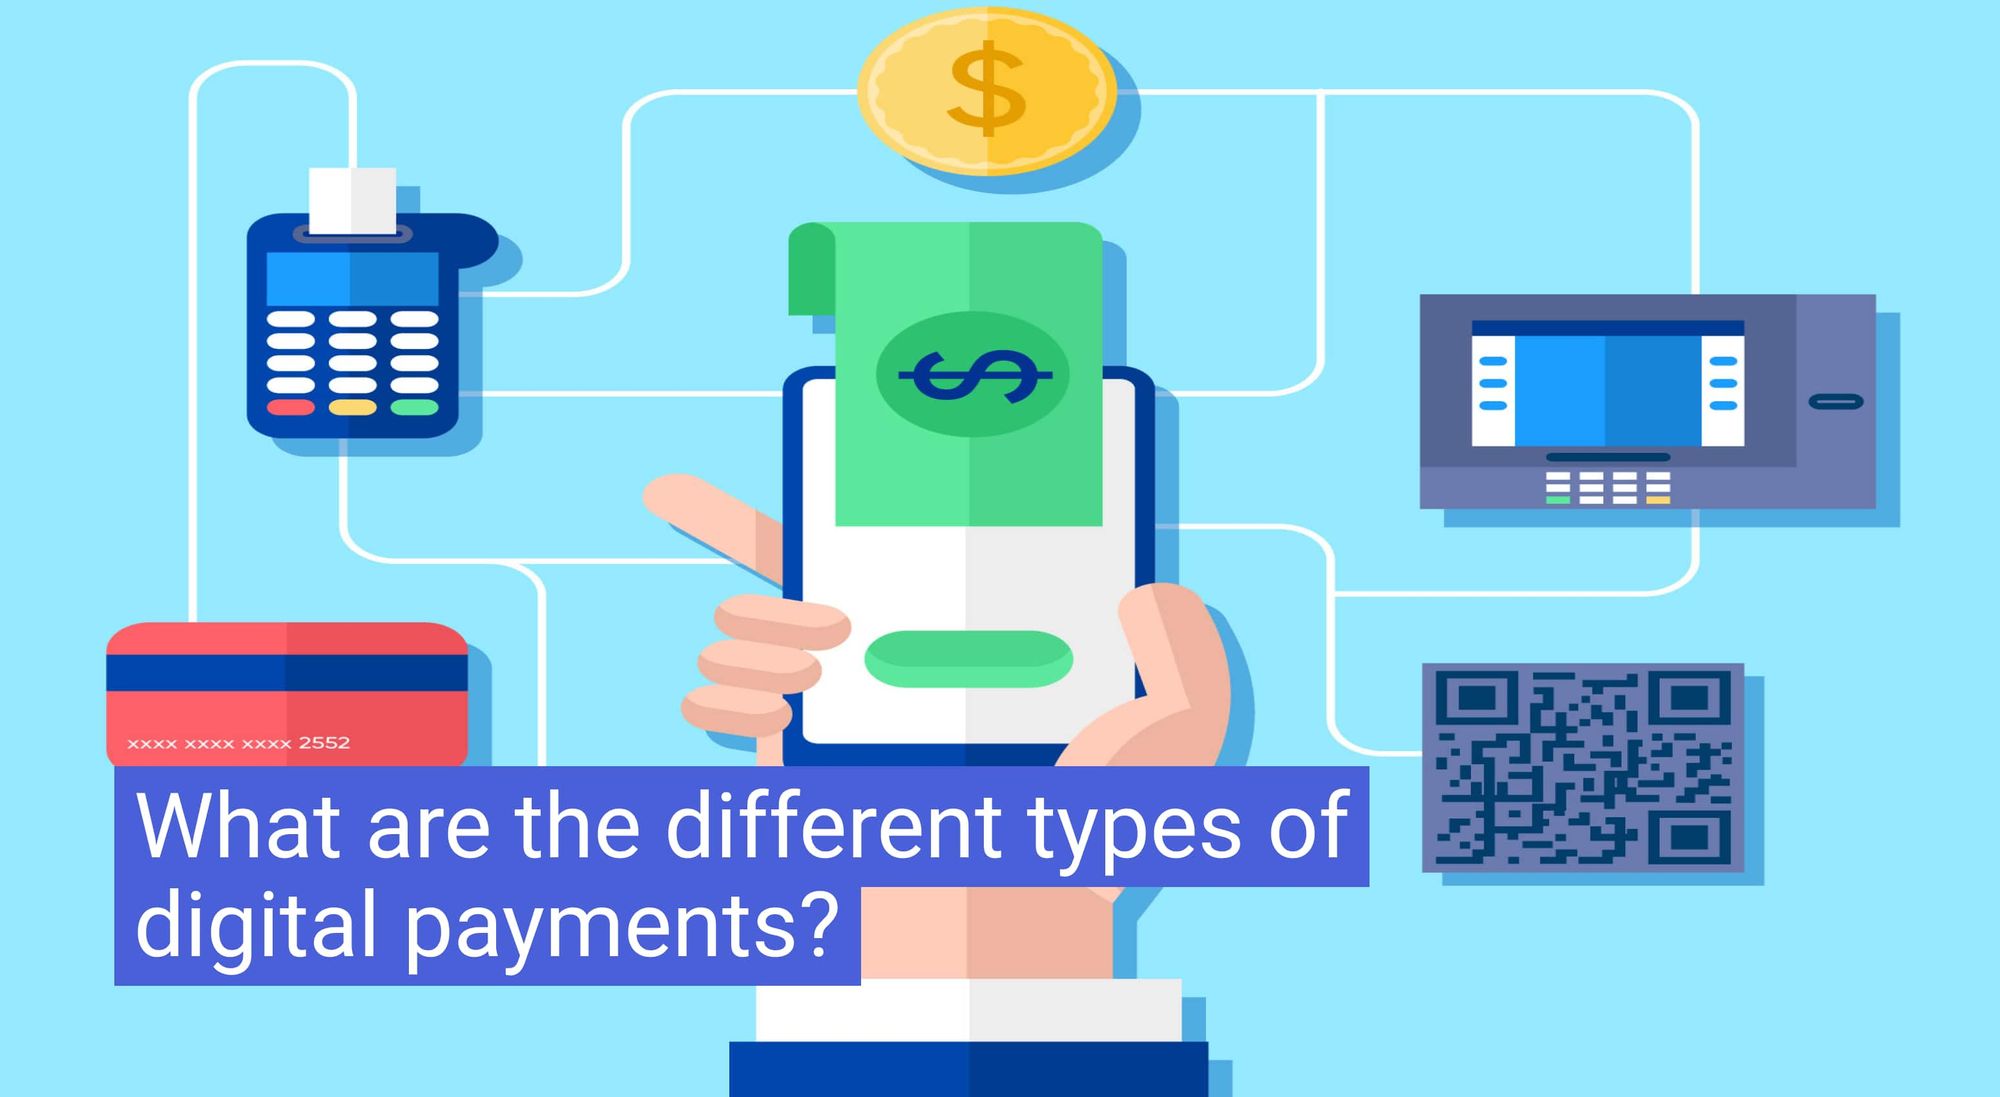 What are the different types of digital payments?